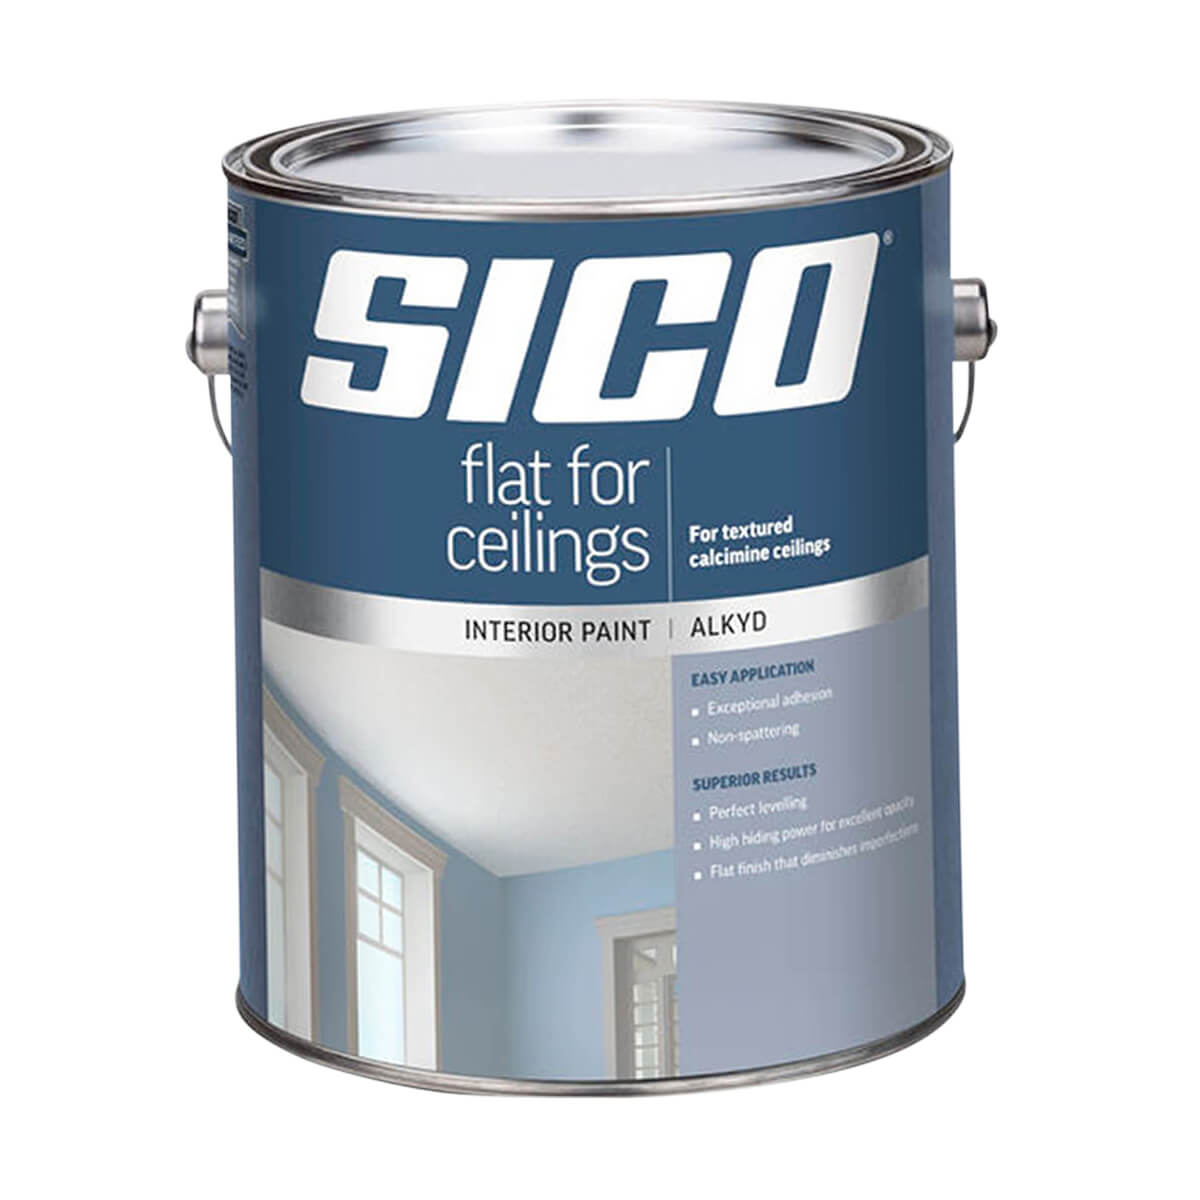 Sico Interior - Alkyd - Paint for Ceilings Series 721 - White - 3.78 L